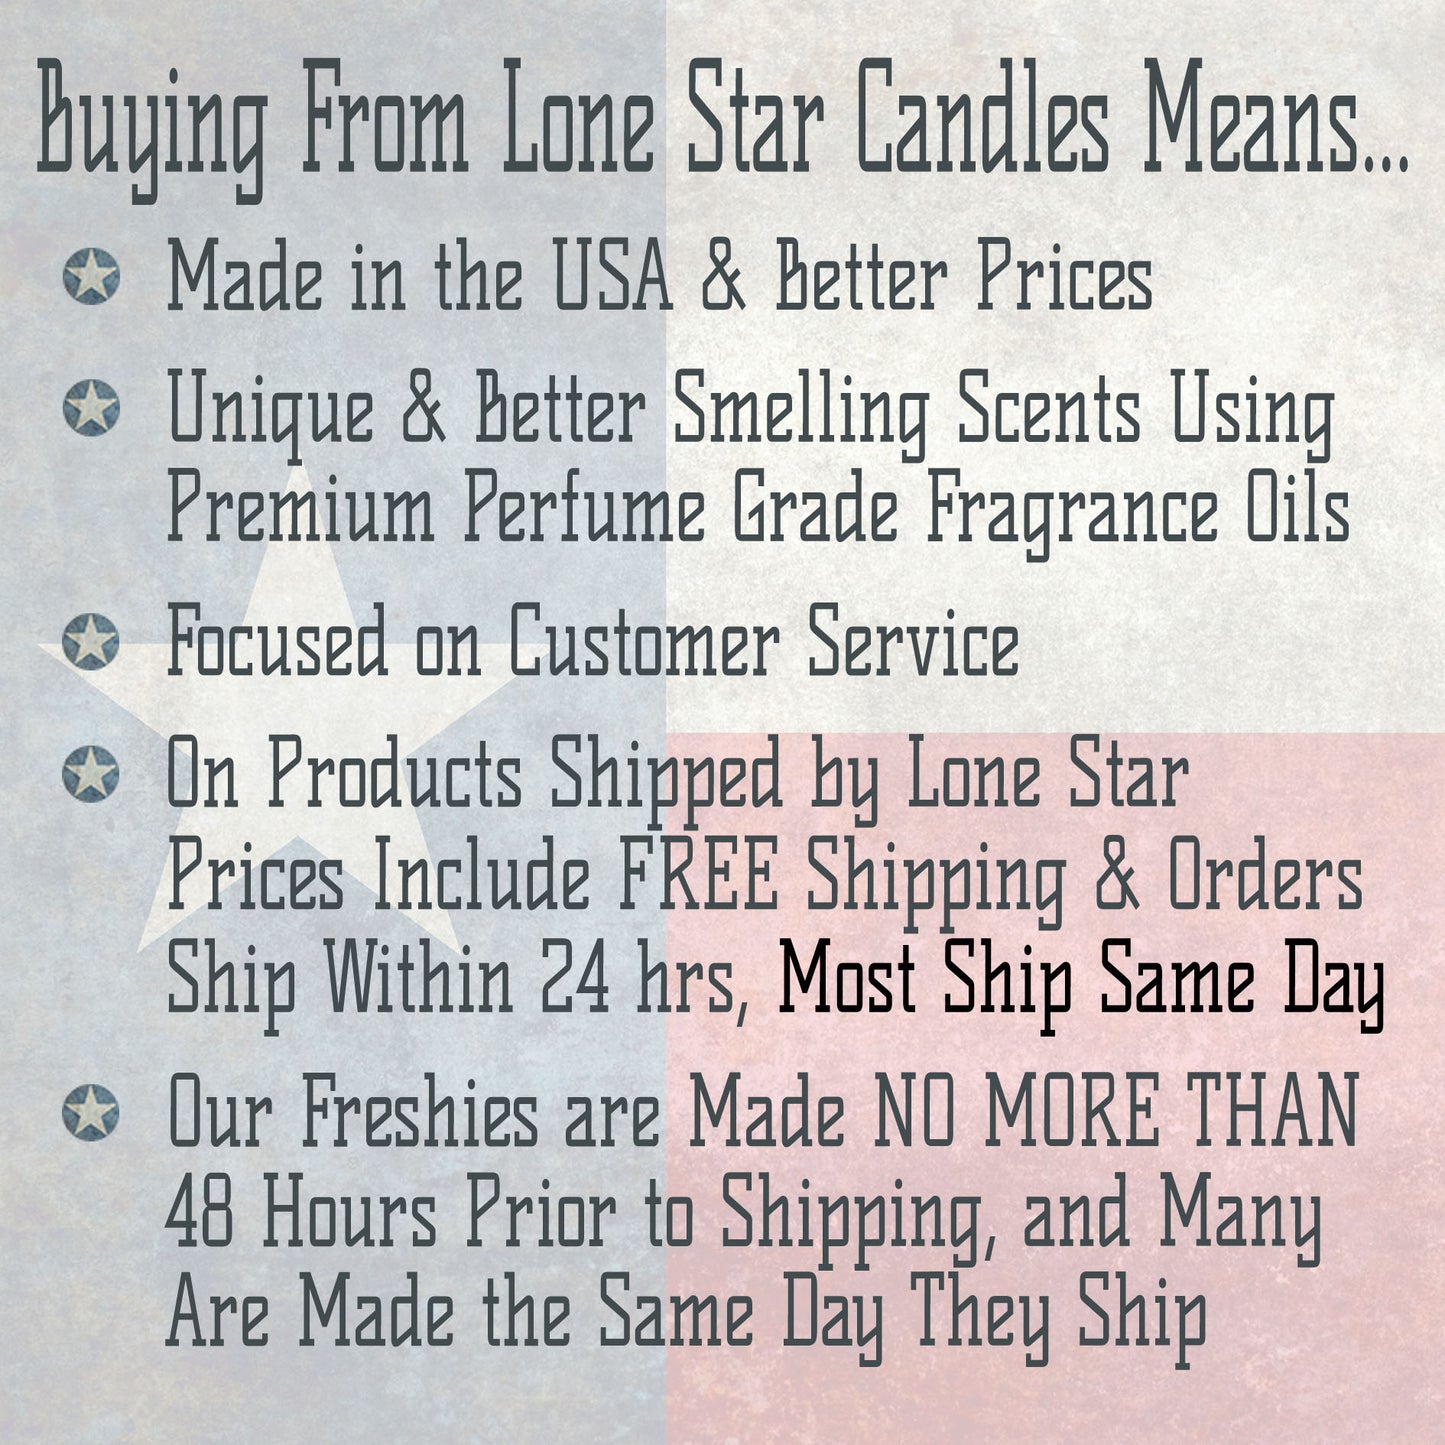 Strawberry Leather, Lone Star Candles & More's Premium Strongly Scented Freshies, Genuine Leather Aroma with Sweet & Juicy Strawberries, Car & Air Freshener, USA Made in Texas, Truck & Tree 1-Pack